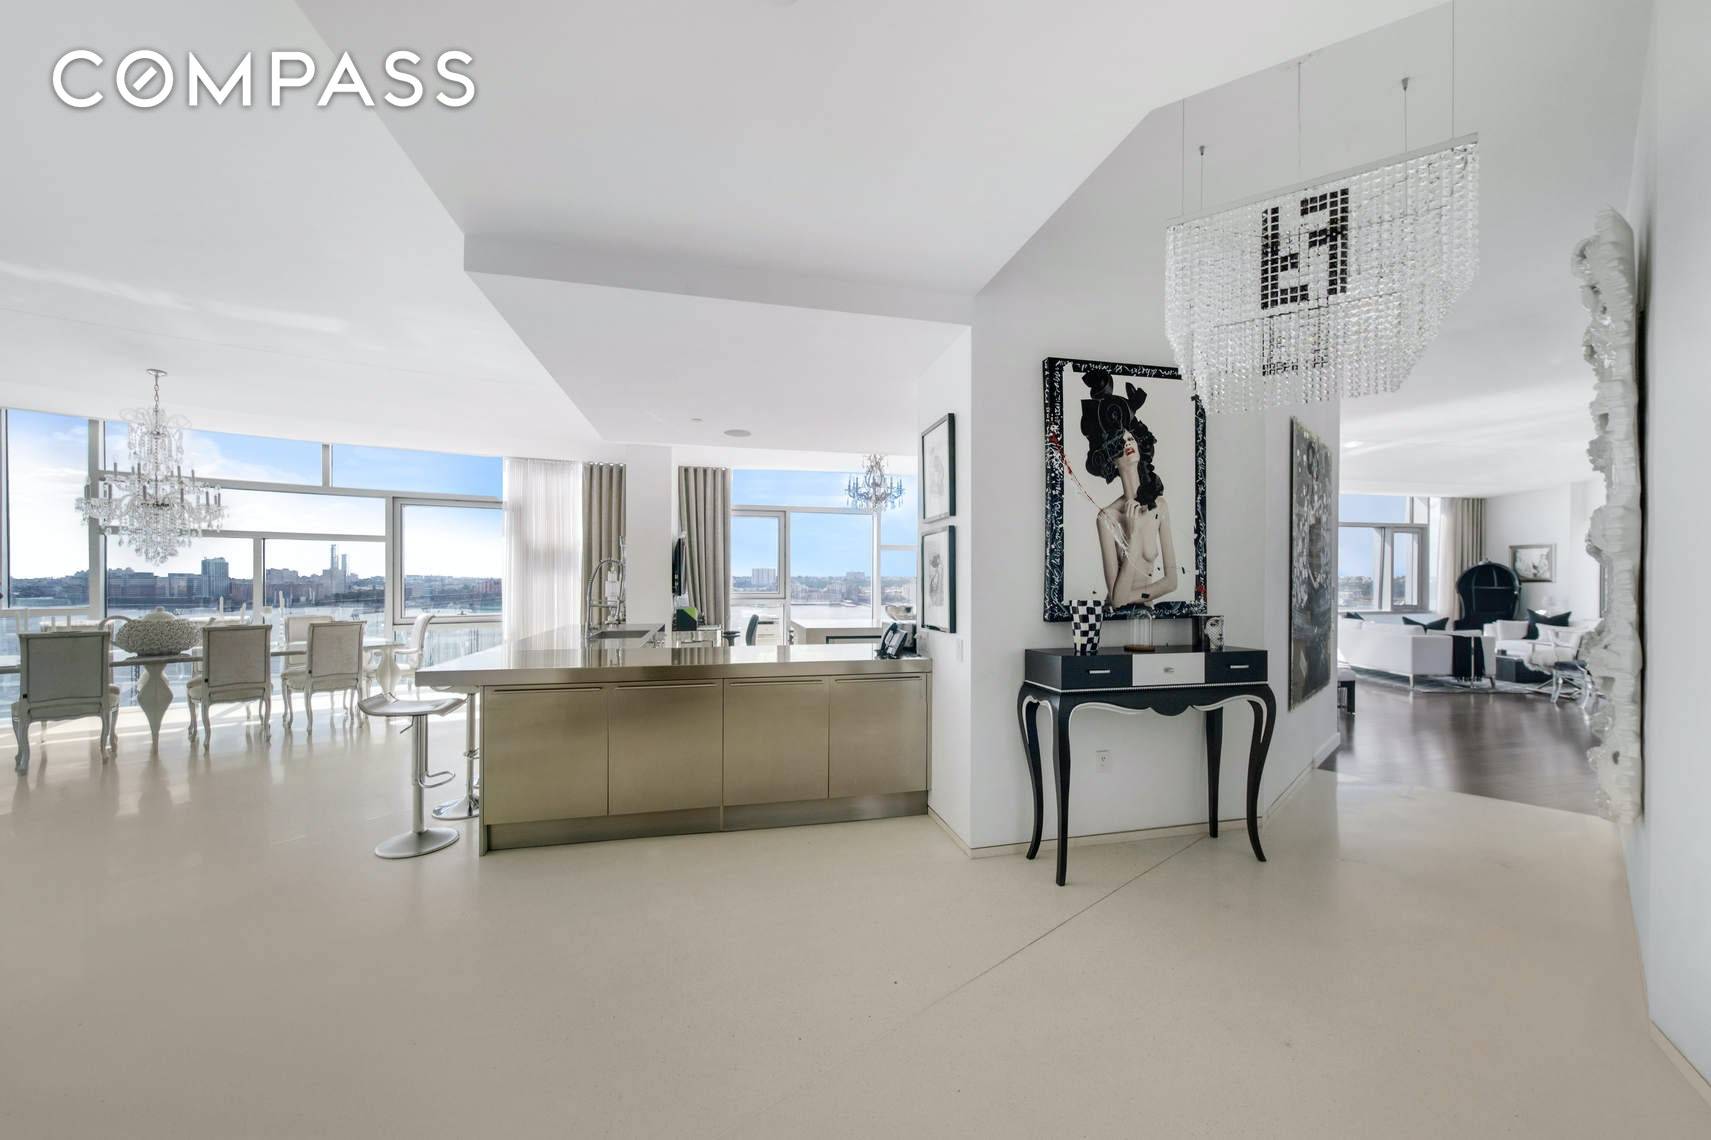 Located in one of Chelsea s most iconic buildings, this palatial residence in the sky is designed to impress with proportions, views, and light, peerless in its class.